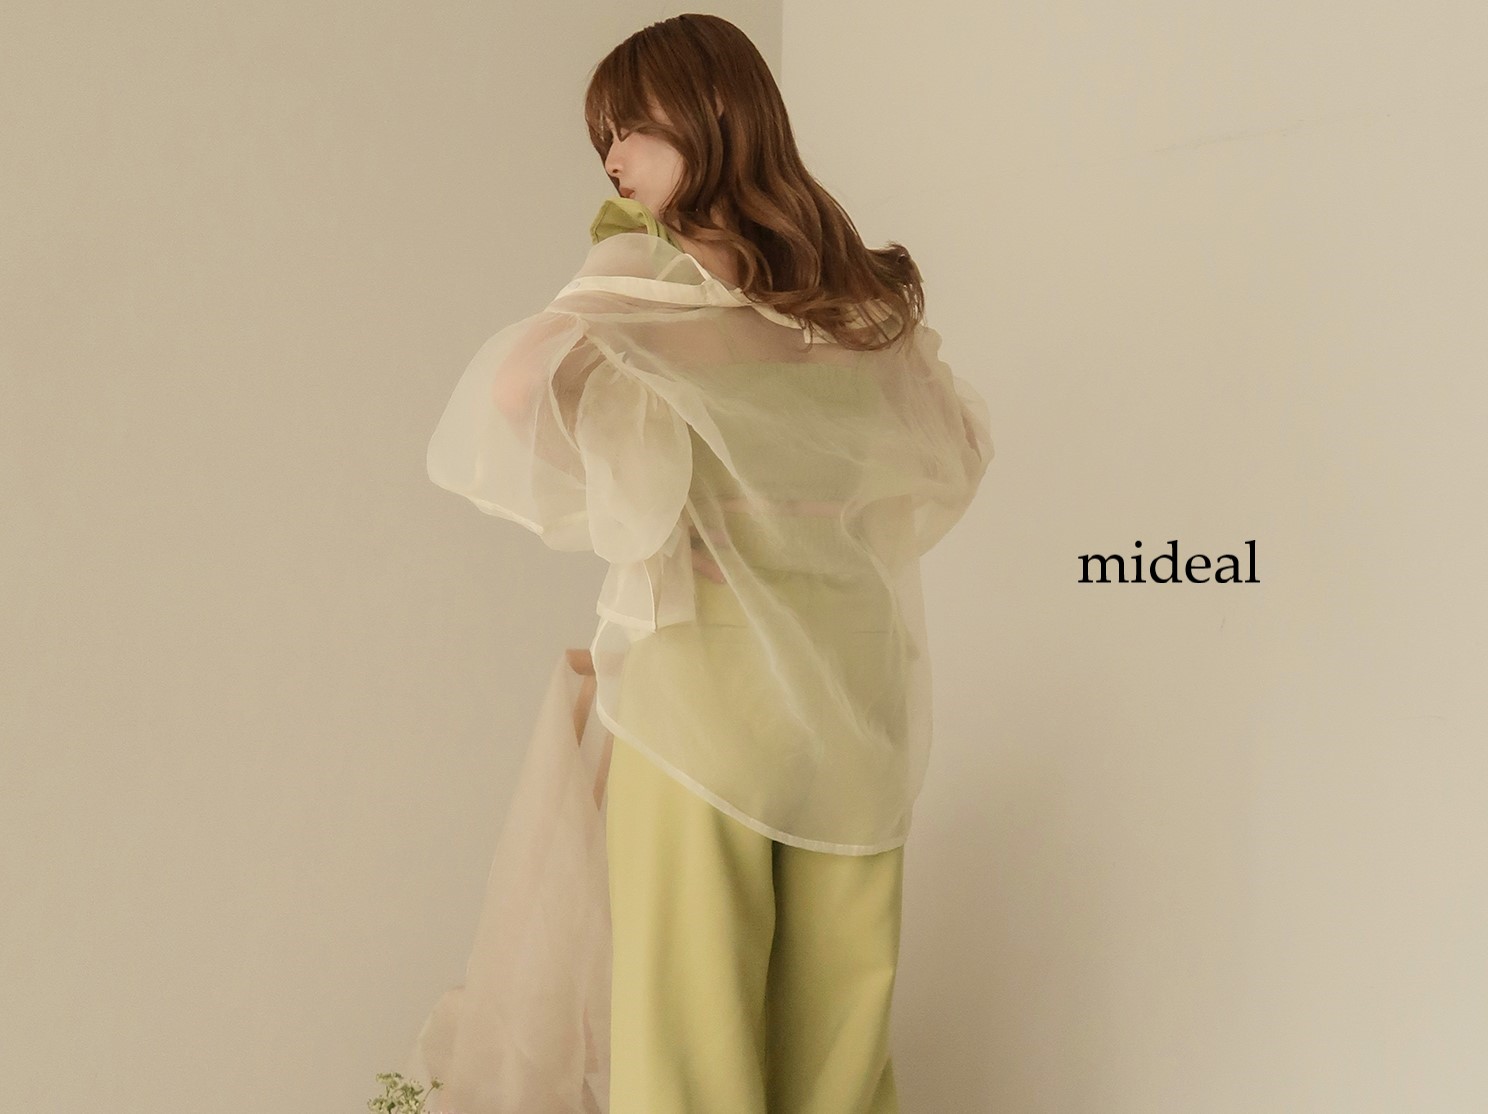 mideal new arrival | 株式会社BUZZWIT